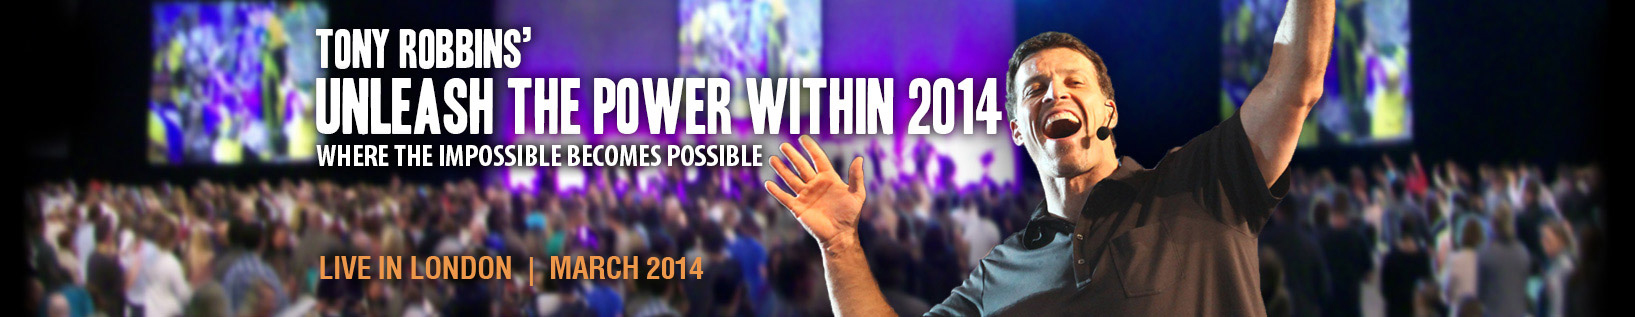 Anthony Robbins Live in London 2014